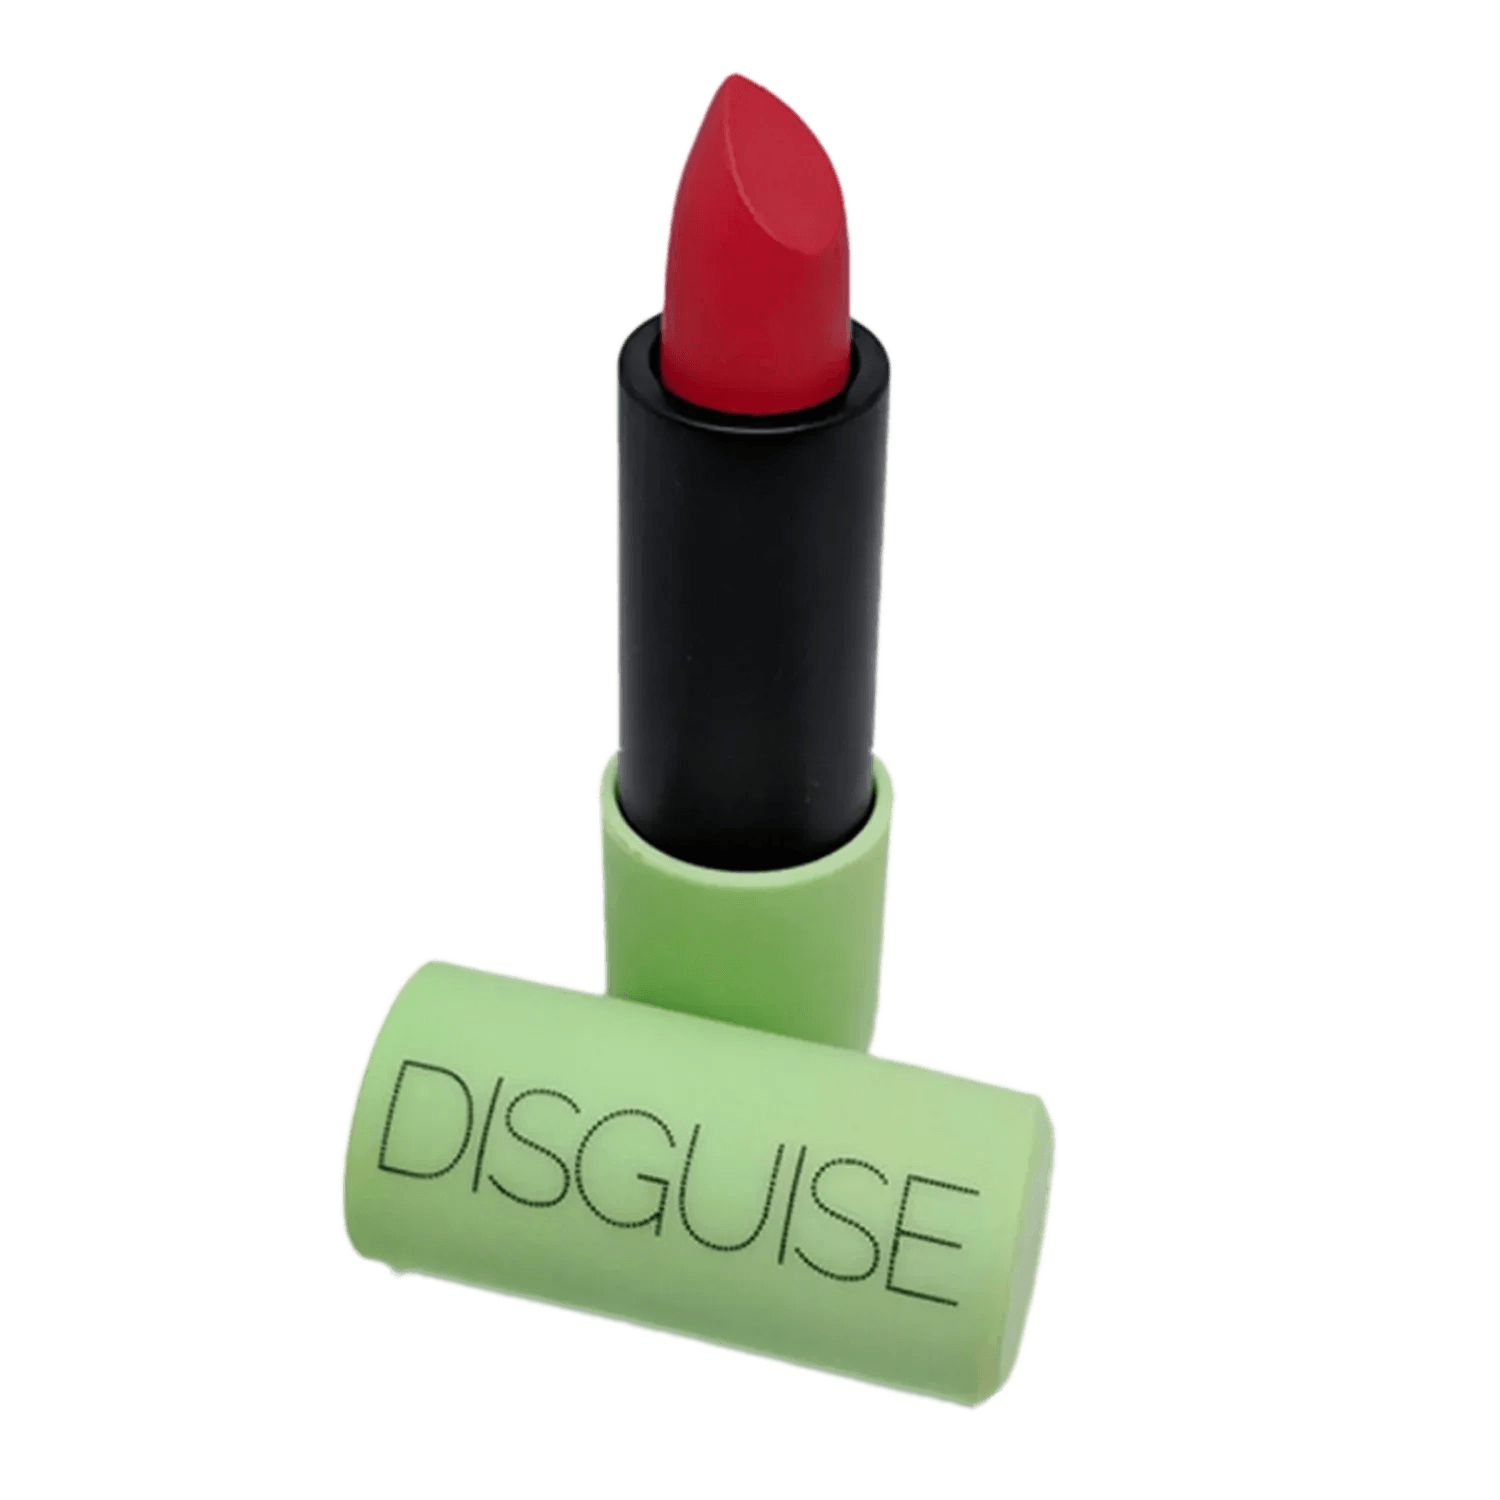 DISGUISE | DISGUISE Ultra Comfortable Satin Matte Lipstick - 02 Red Model (4.2g)